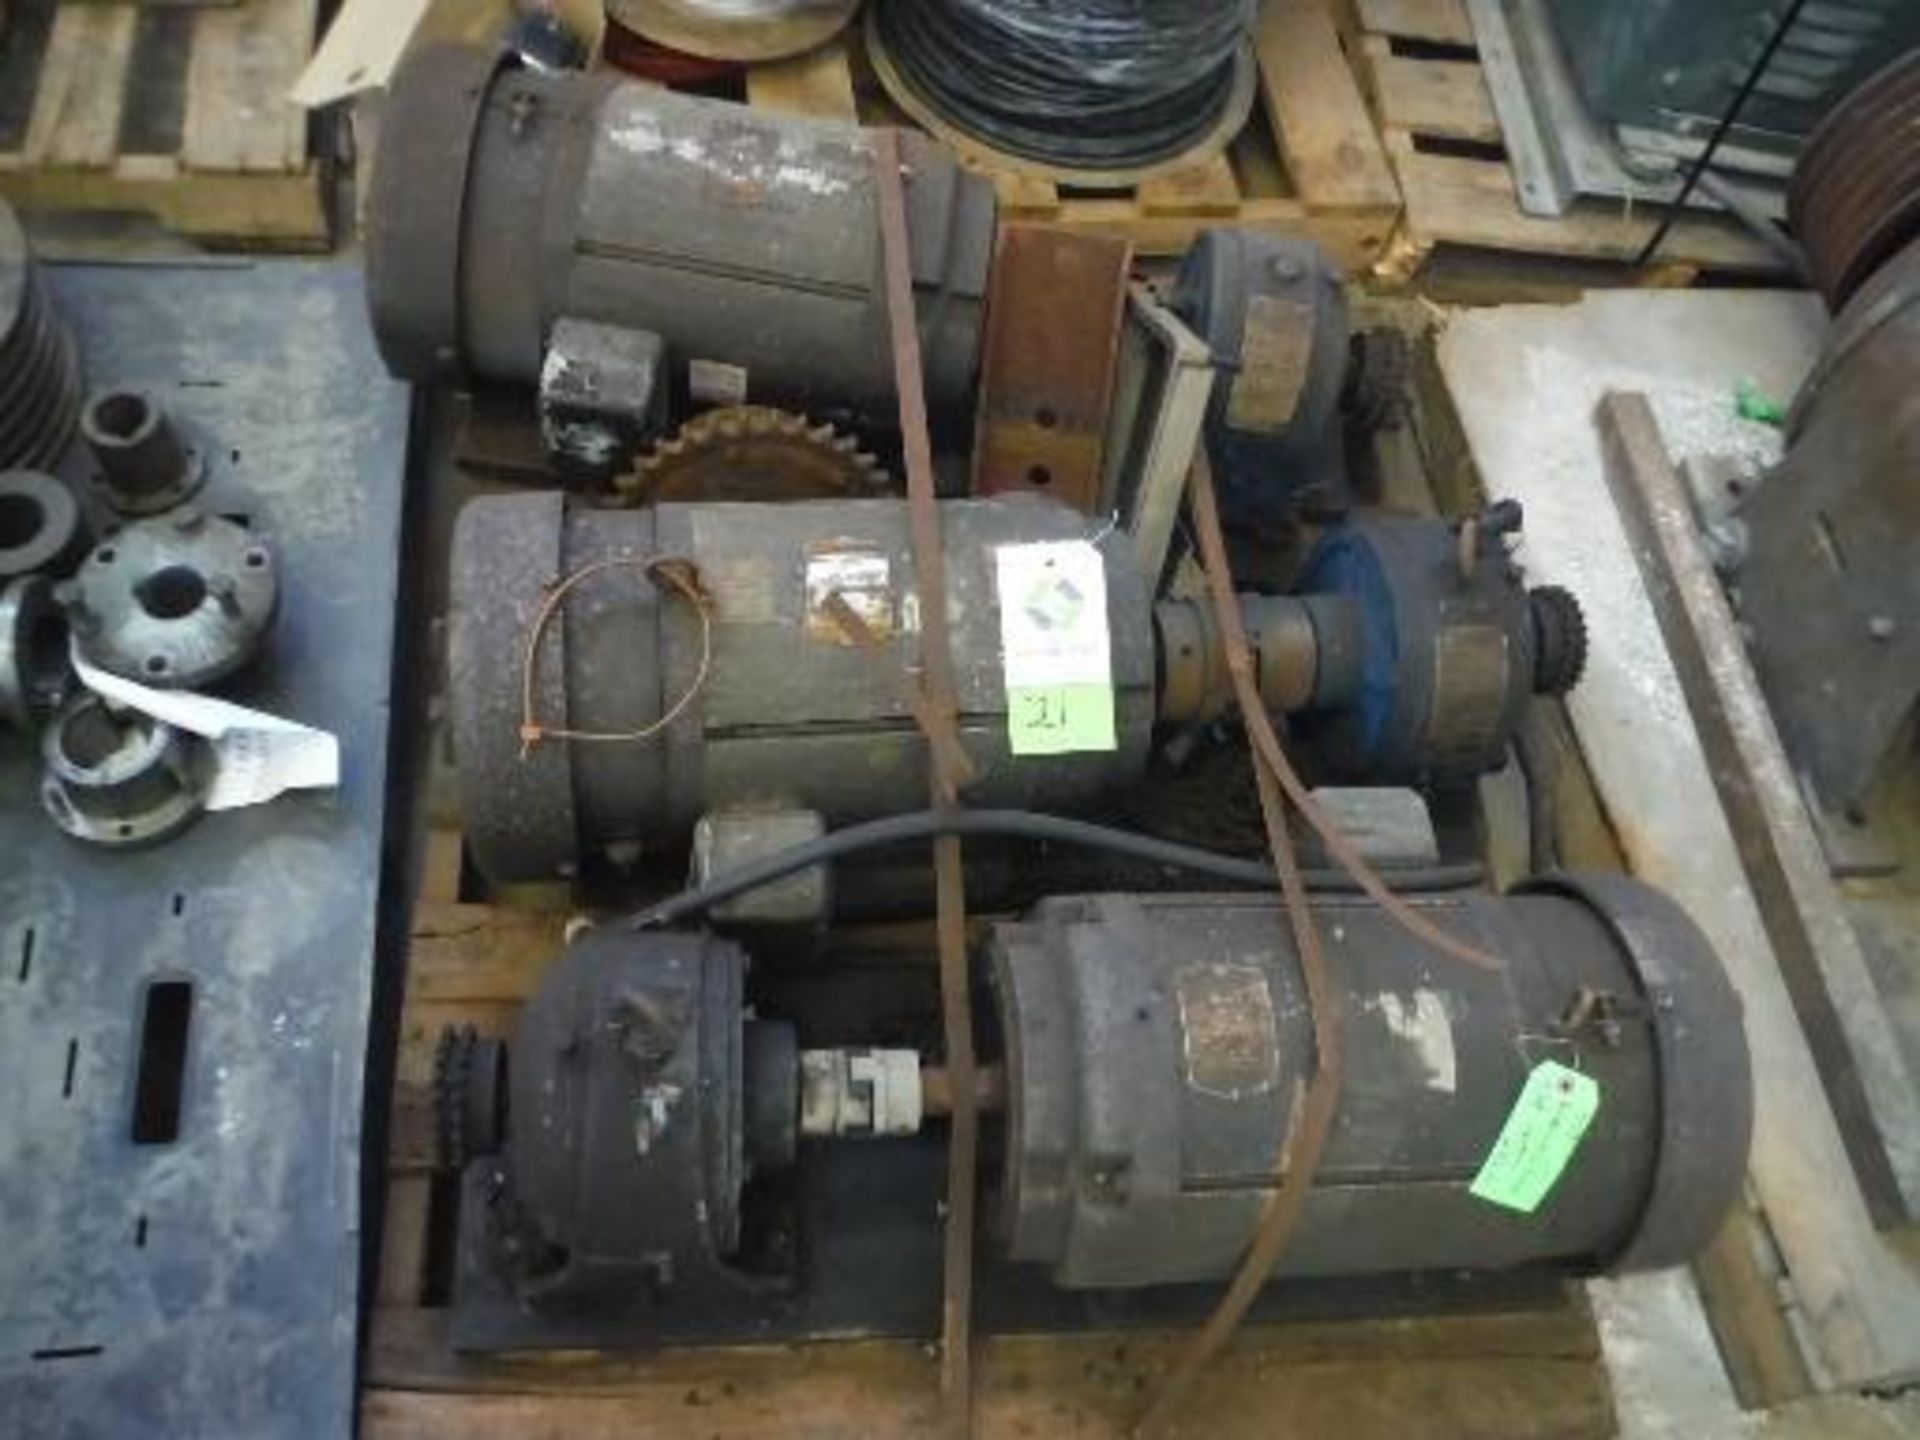 (3) assorted motors with drives ***___   A Rigging Fee of _ $25 _ will be due the rigger   ___***